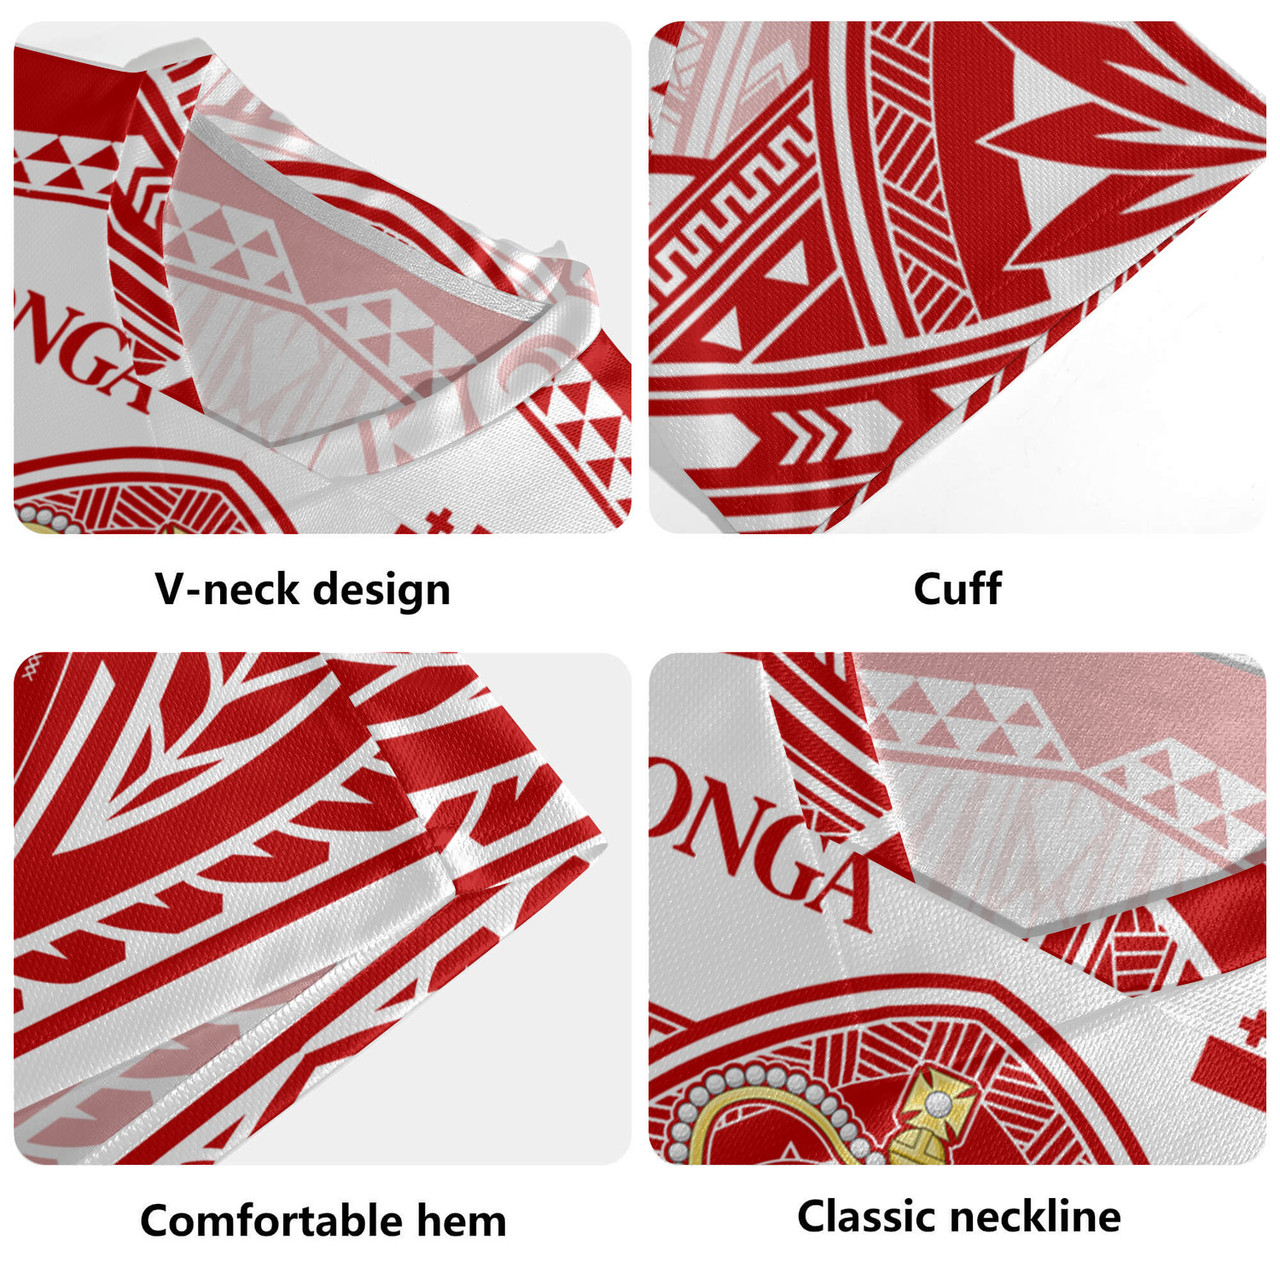 Tonga Rugby Jersey Seal Tribal Flag Color Design